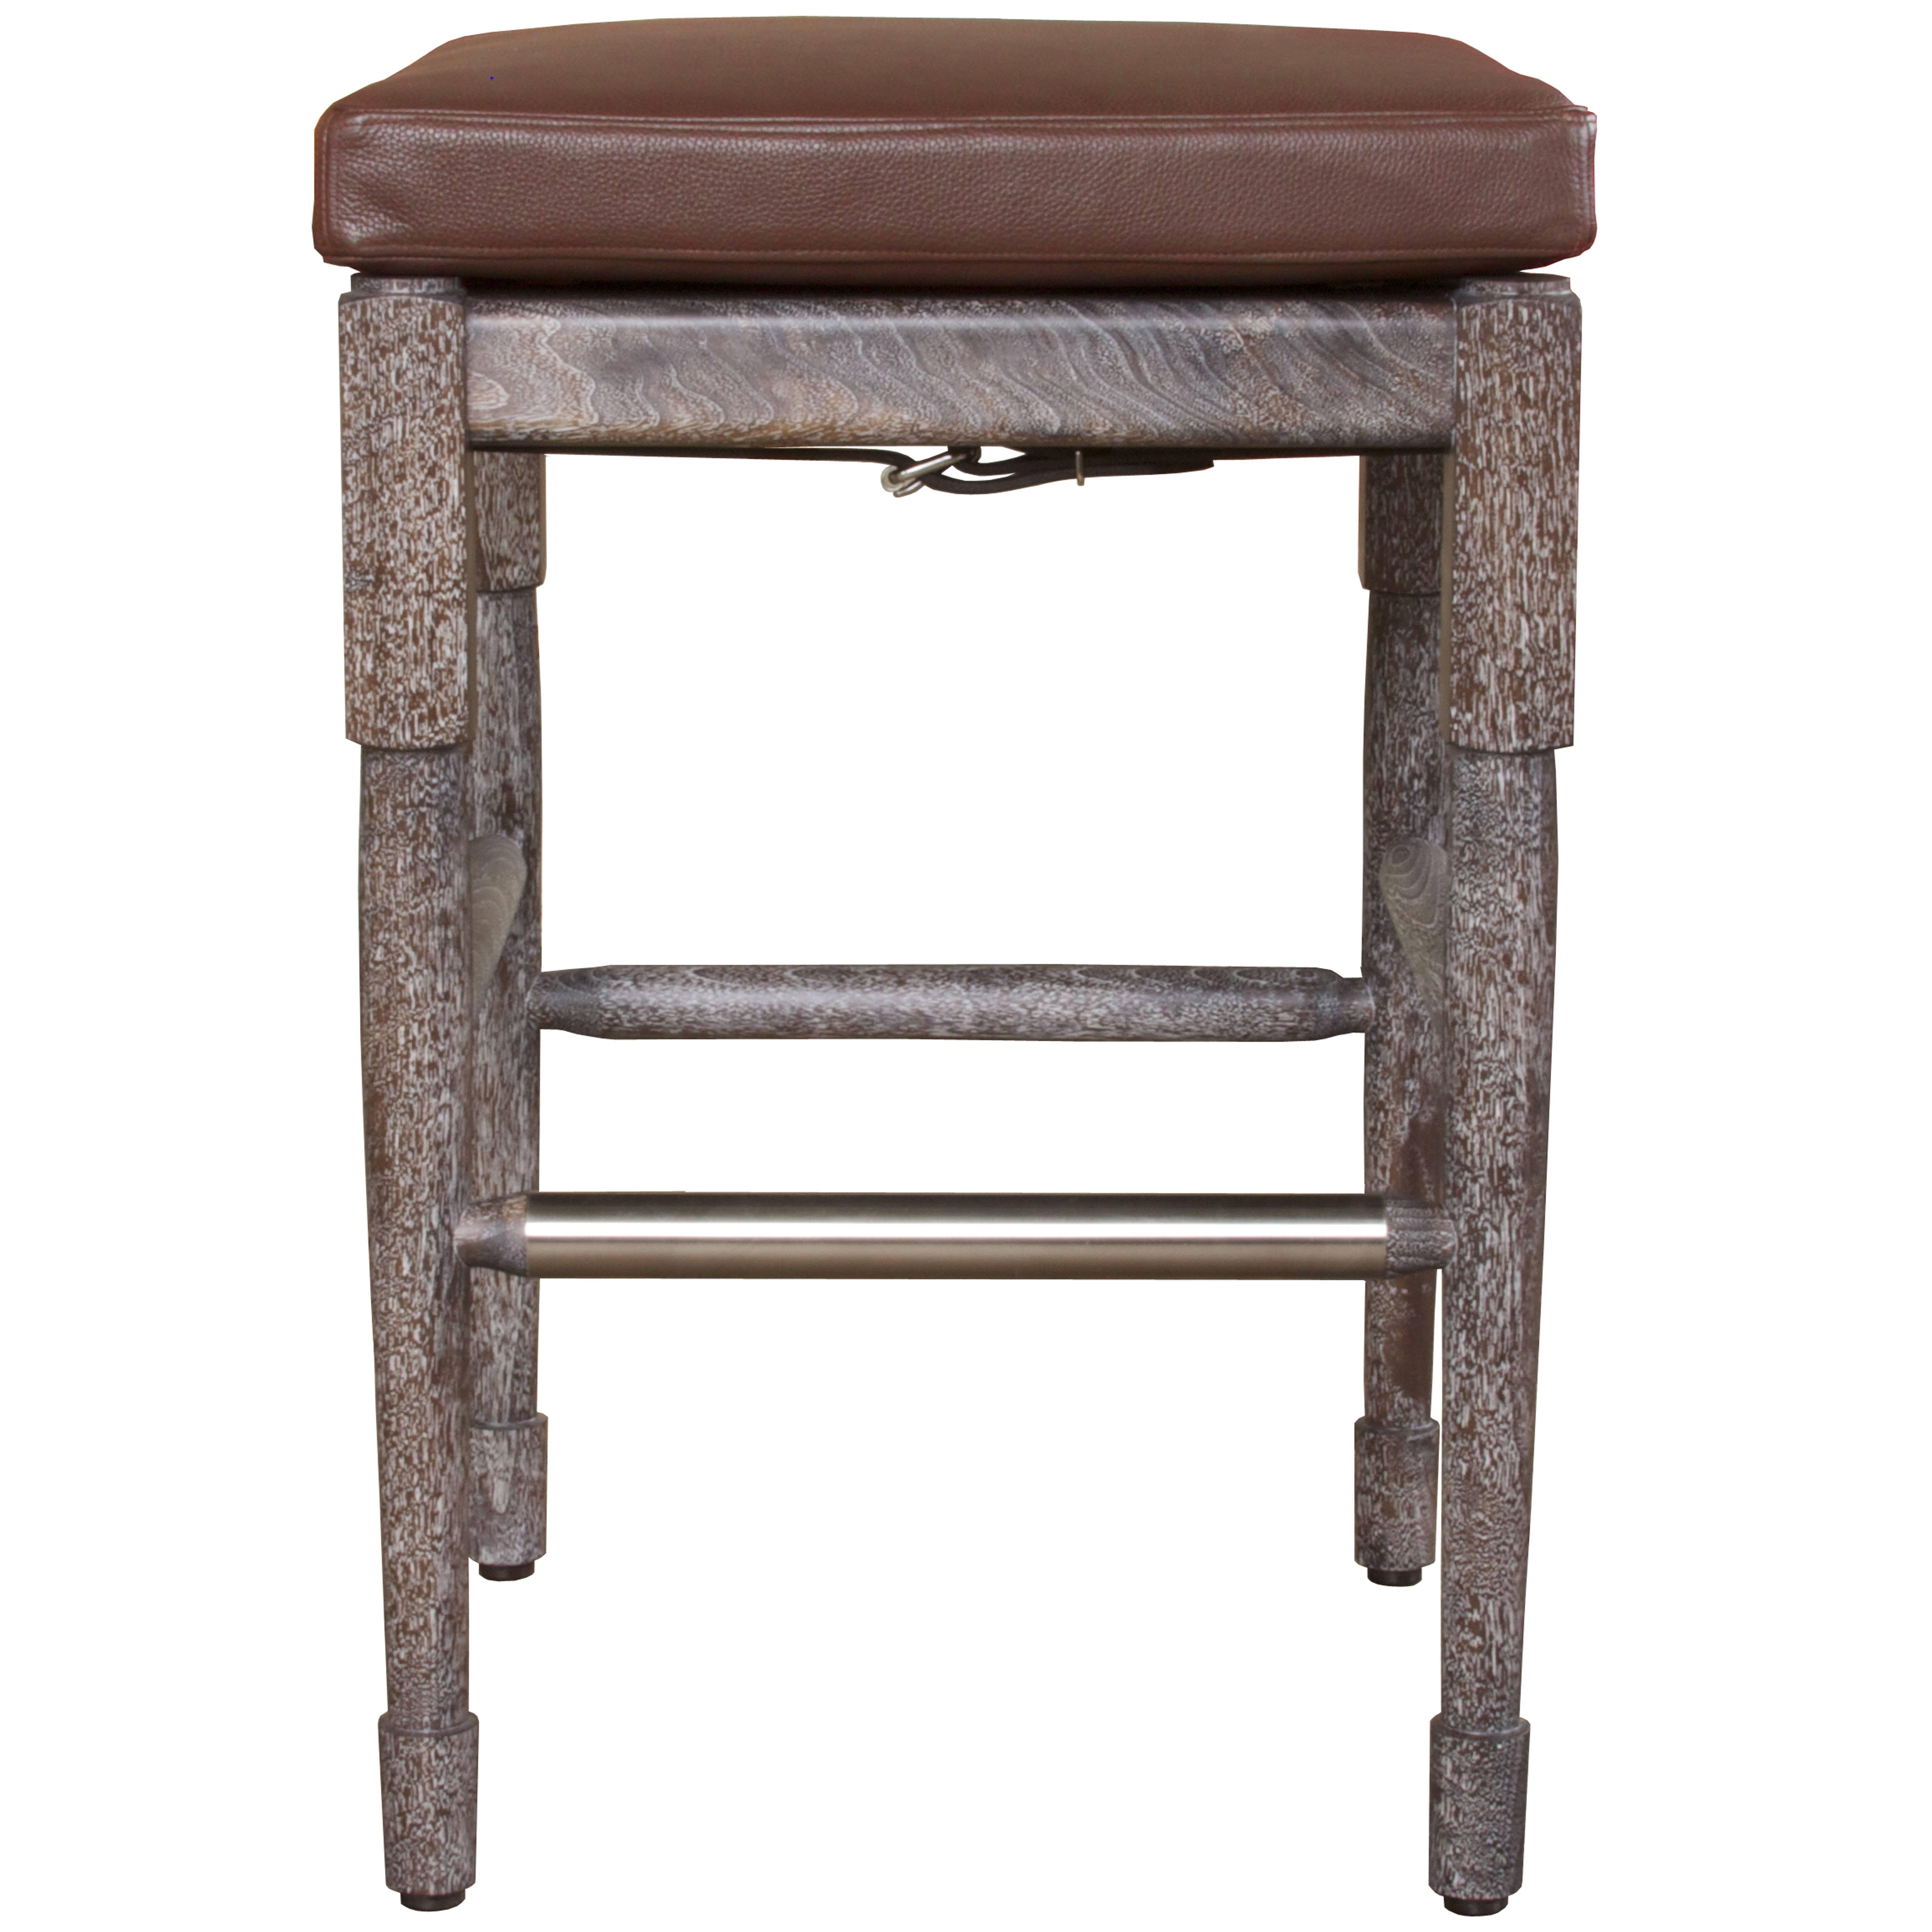 Chatwin Bar Stool - handcrafted by Richard Wrightman Design